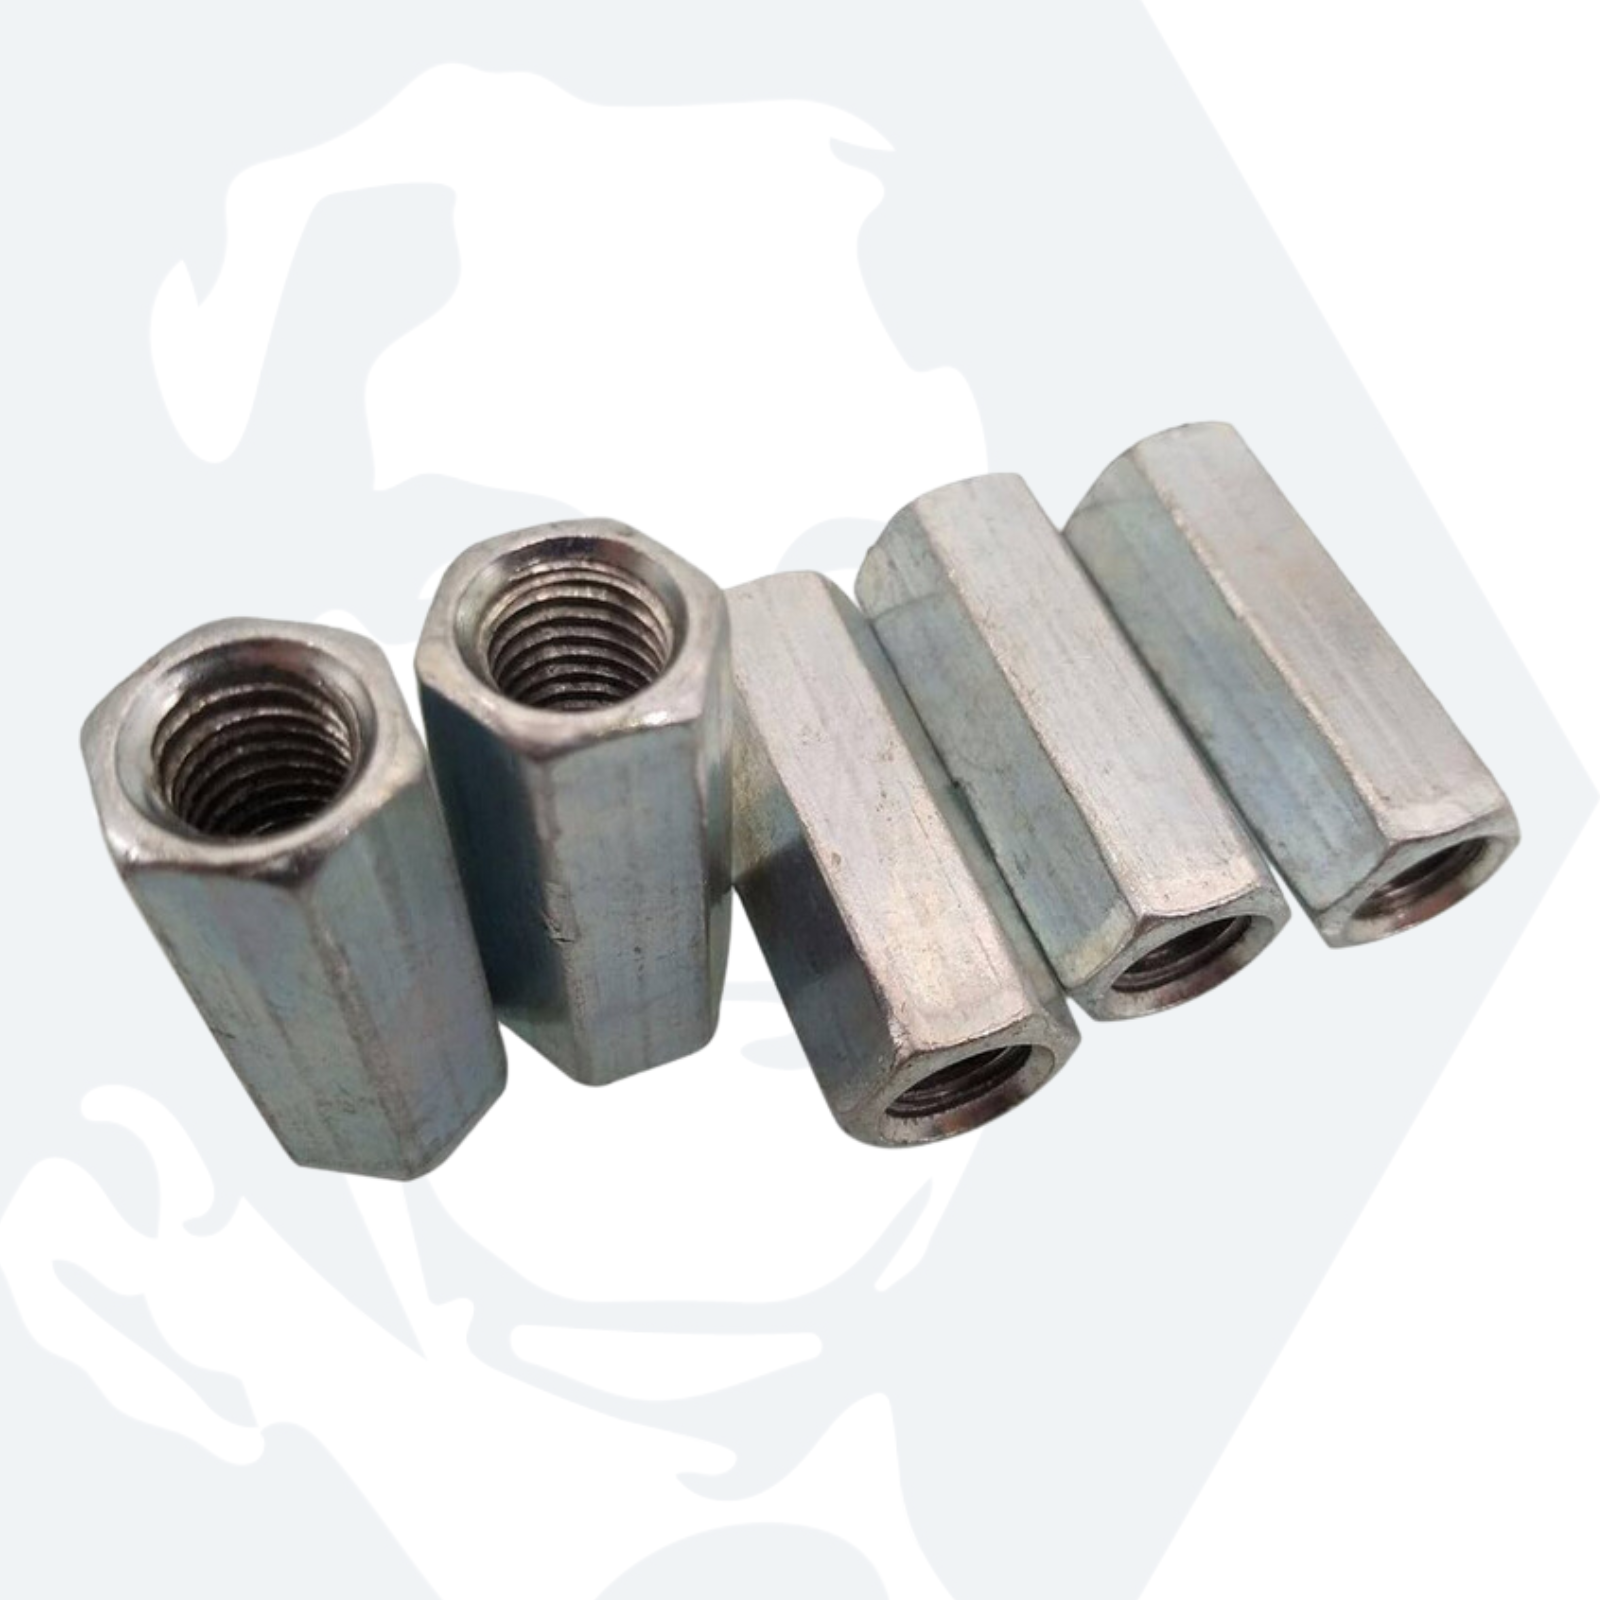 M6 Hexagon Connector Nuts - Zinc Plated Steel